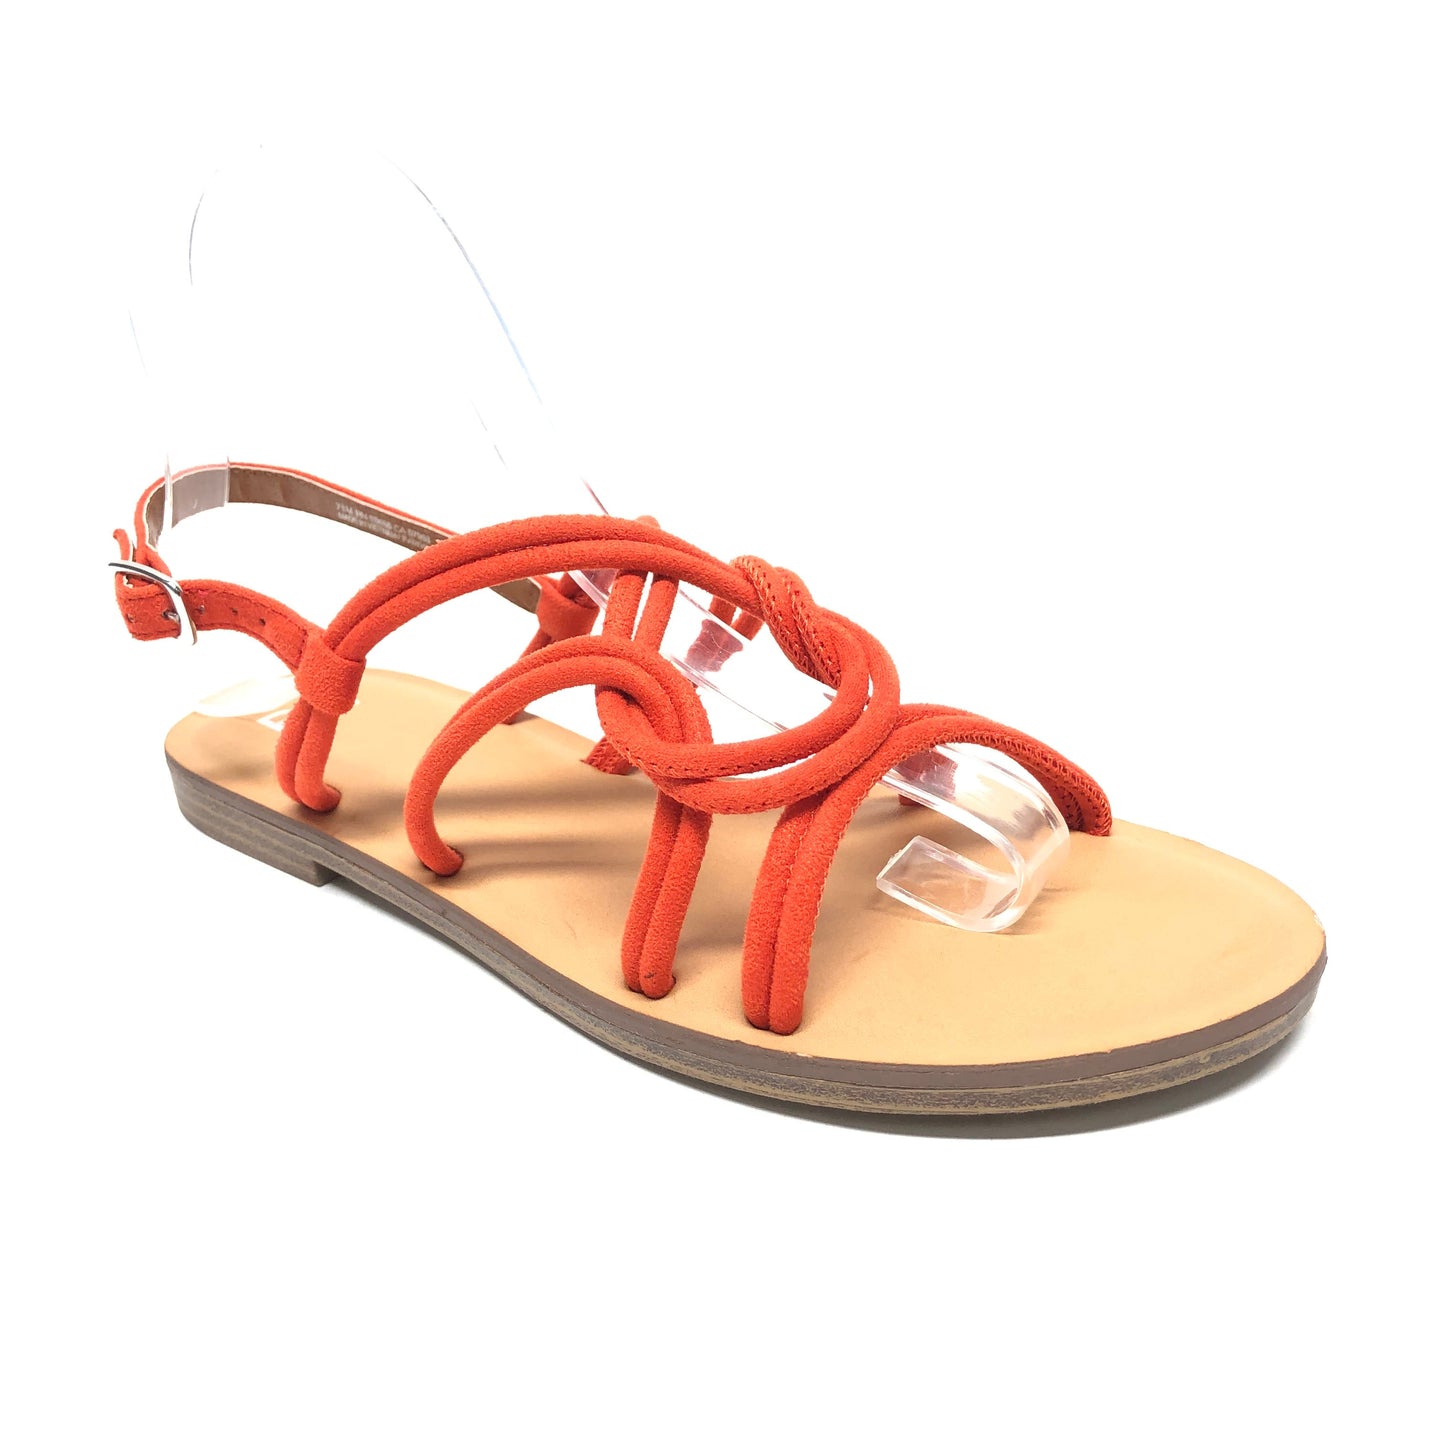 Sandals Flats By Bp  Size: 7.5